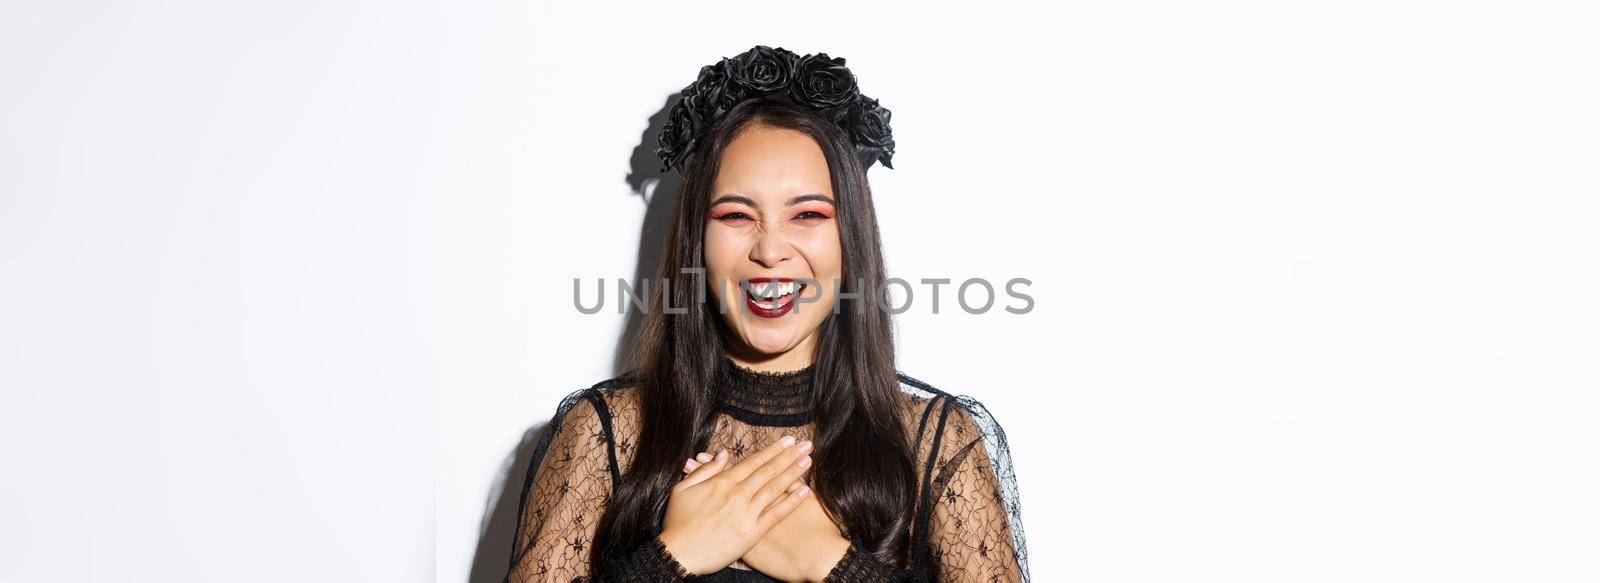 Image of evil witch press hands to chest and laughing, girl celebrating halloween and having fun, standing over white background.